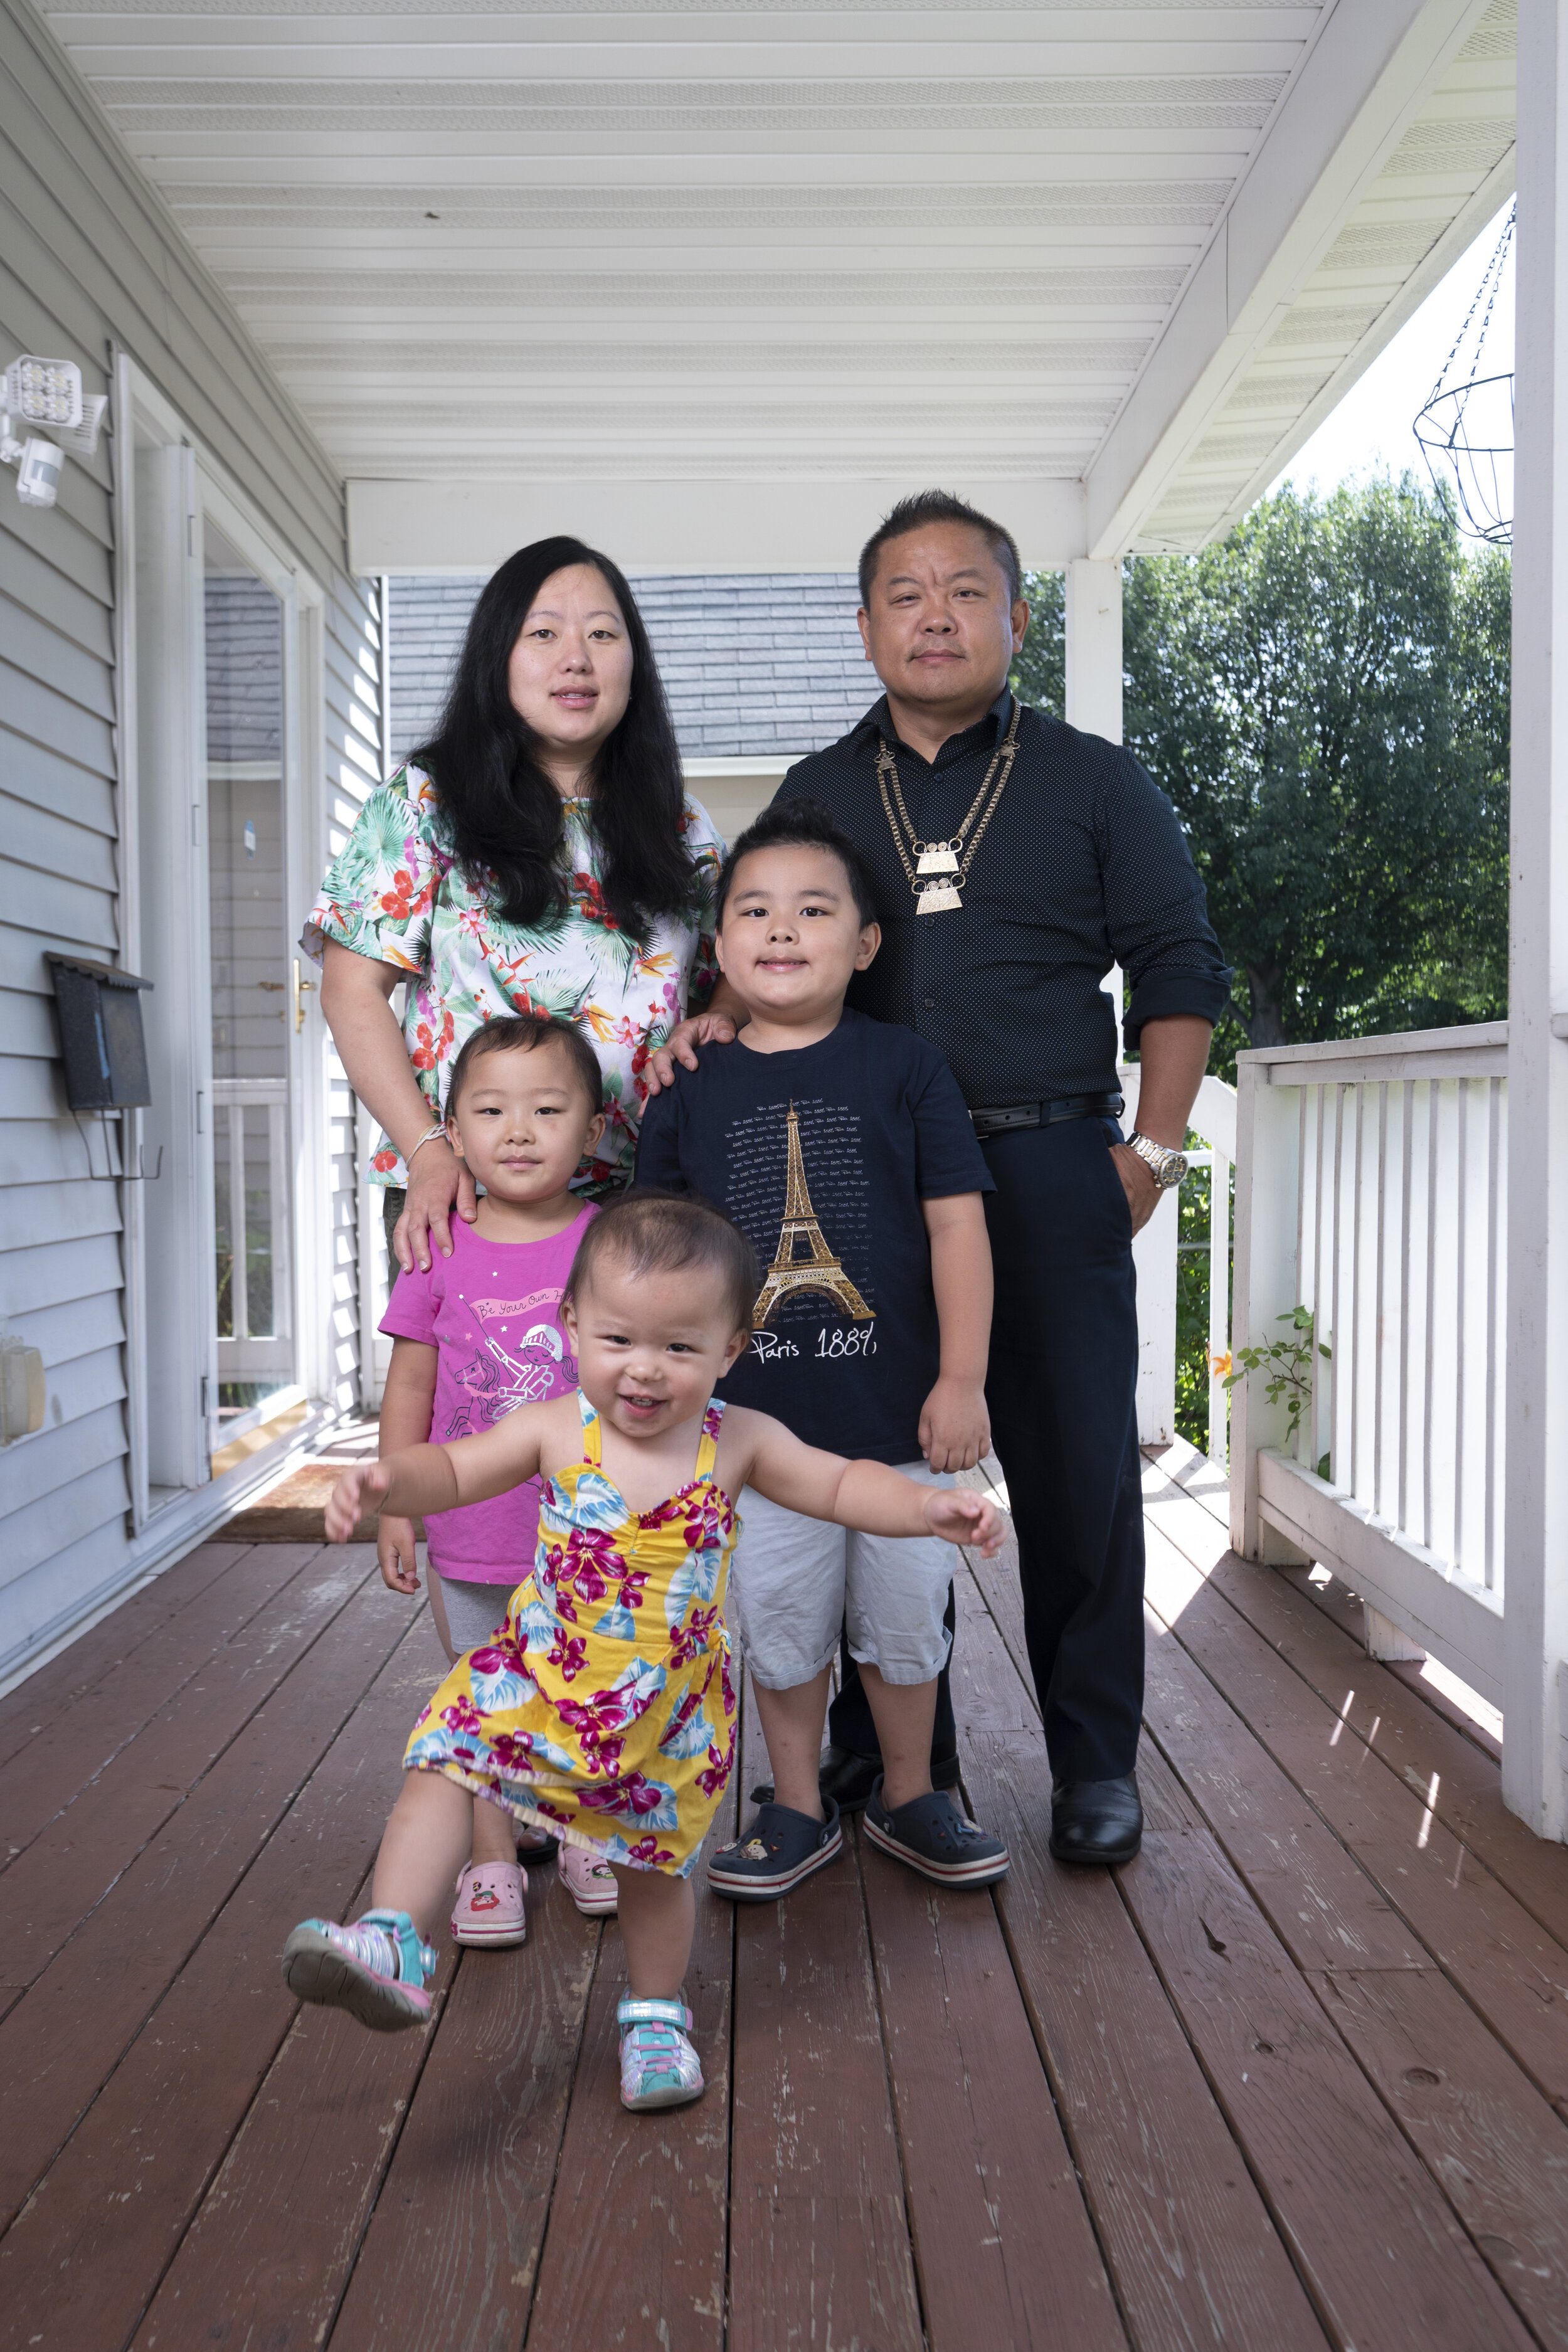 St. Paul City Councilmember for Ward 1, Dai Thao and Family